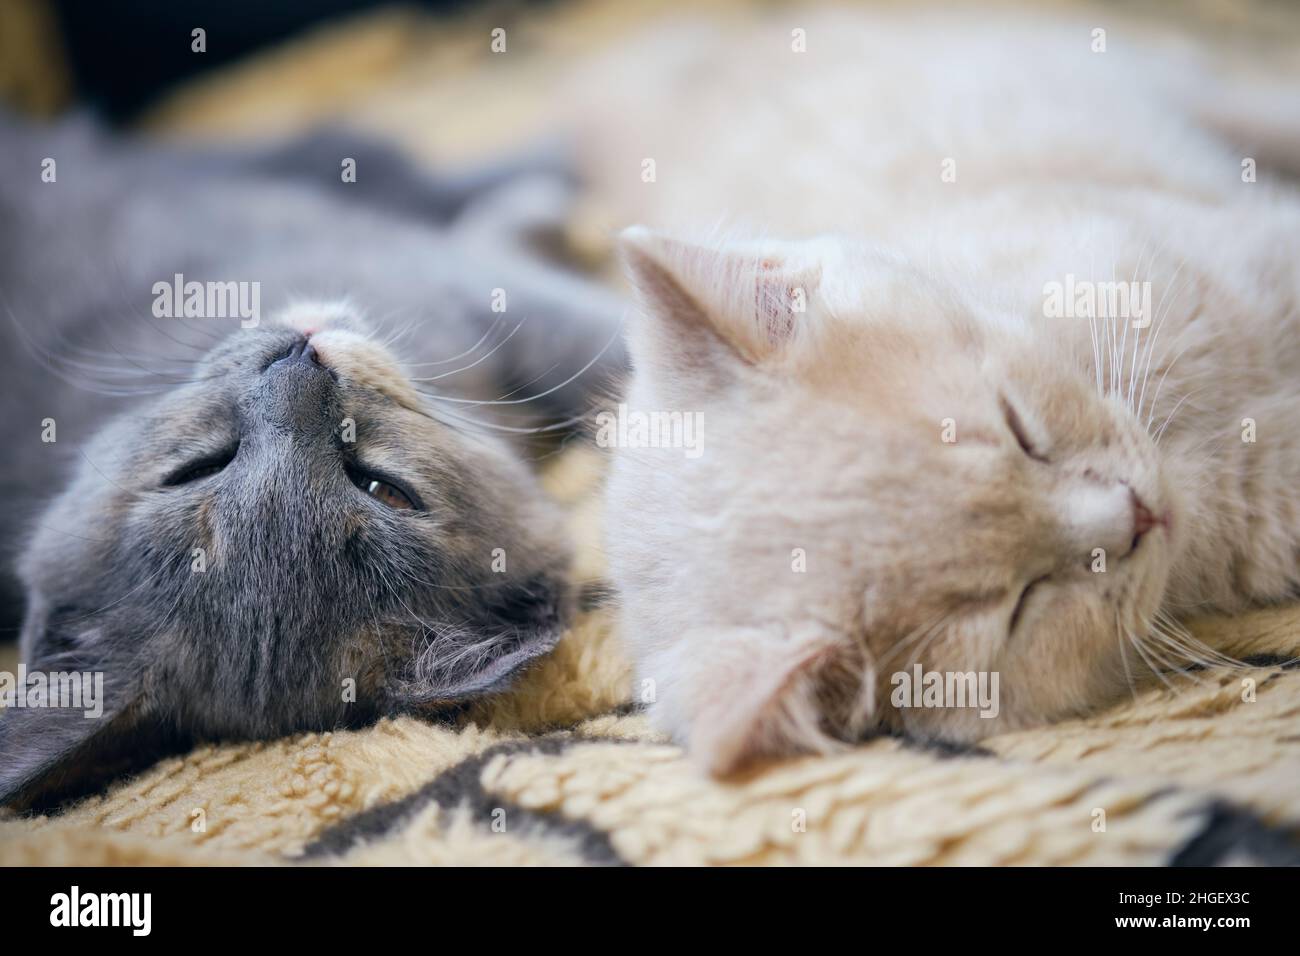 Close-up of two tired kittens napping together Stock Photo